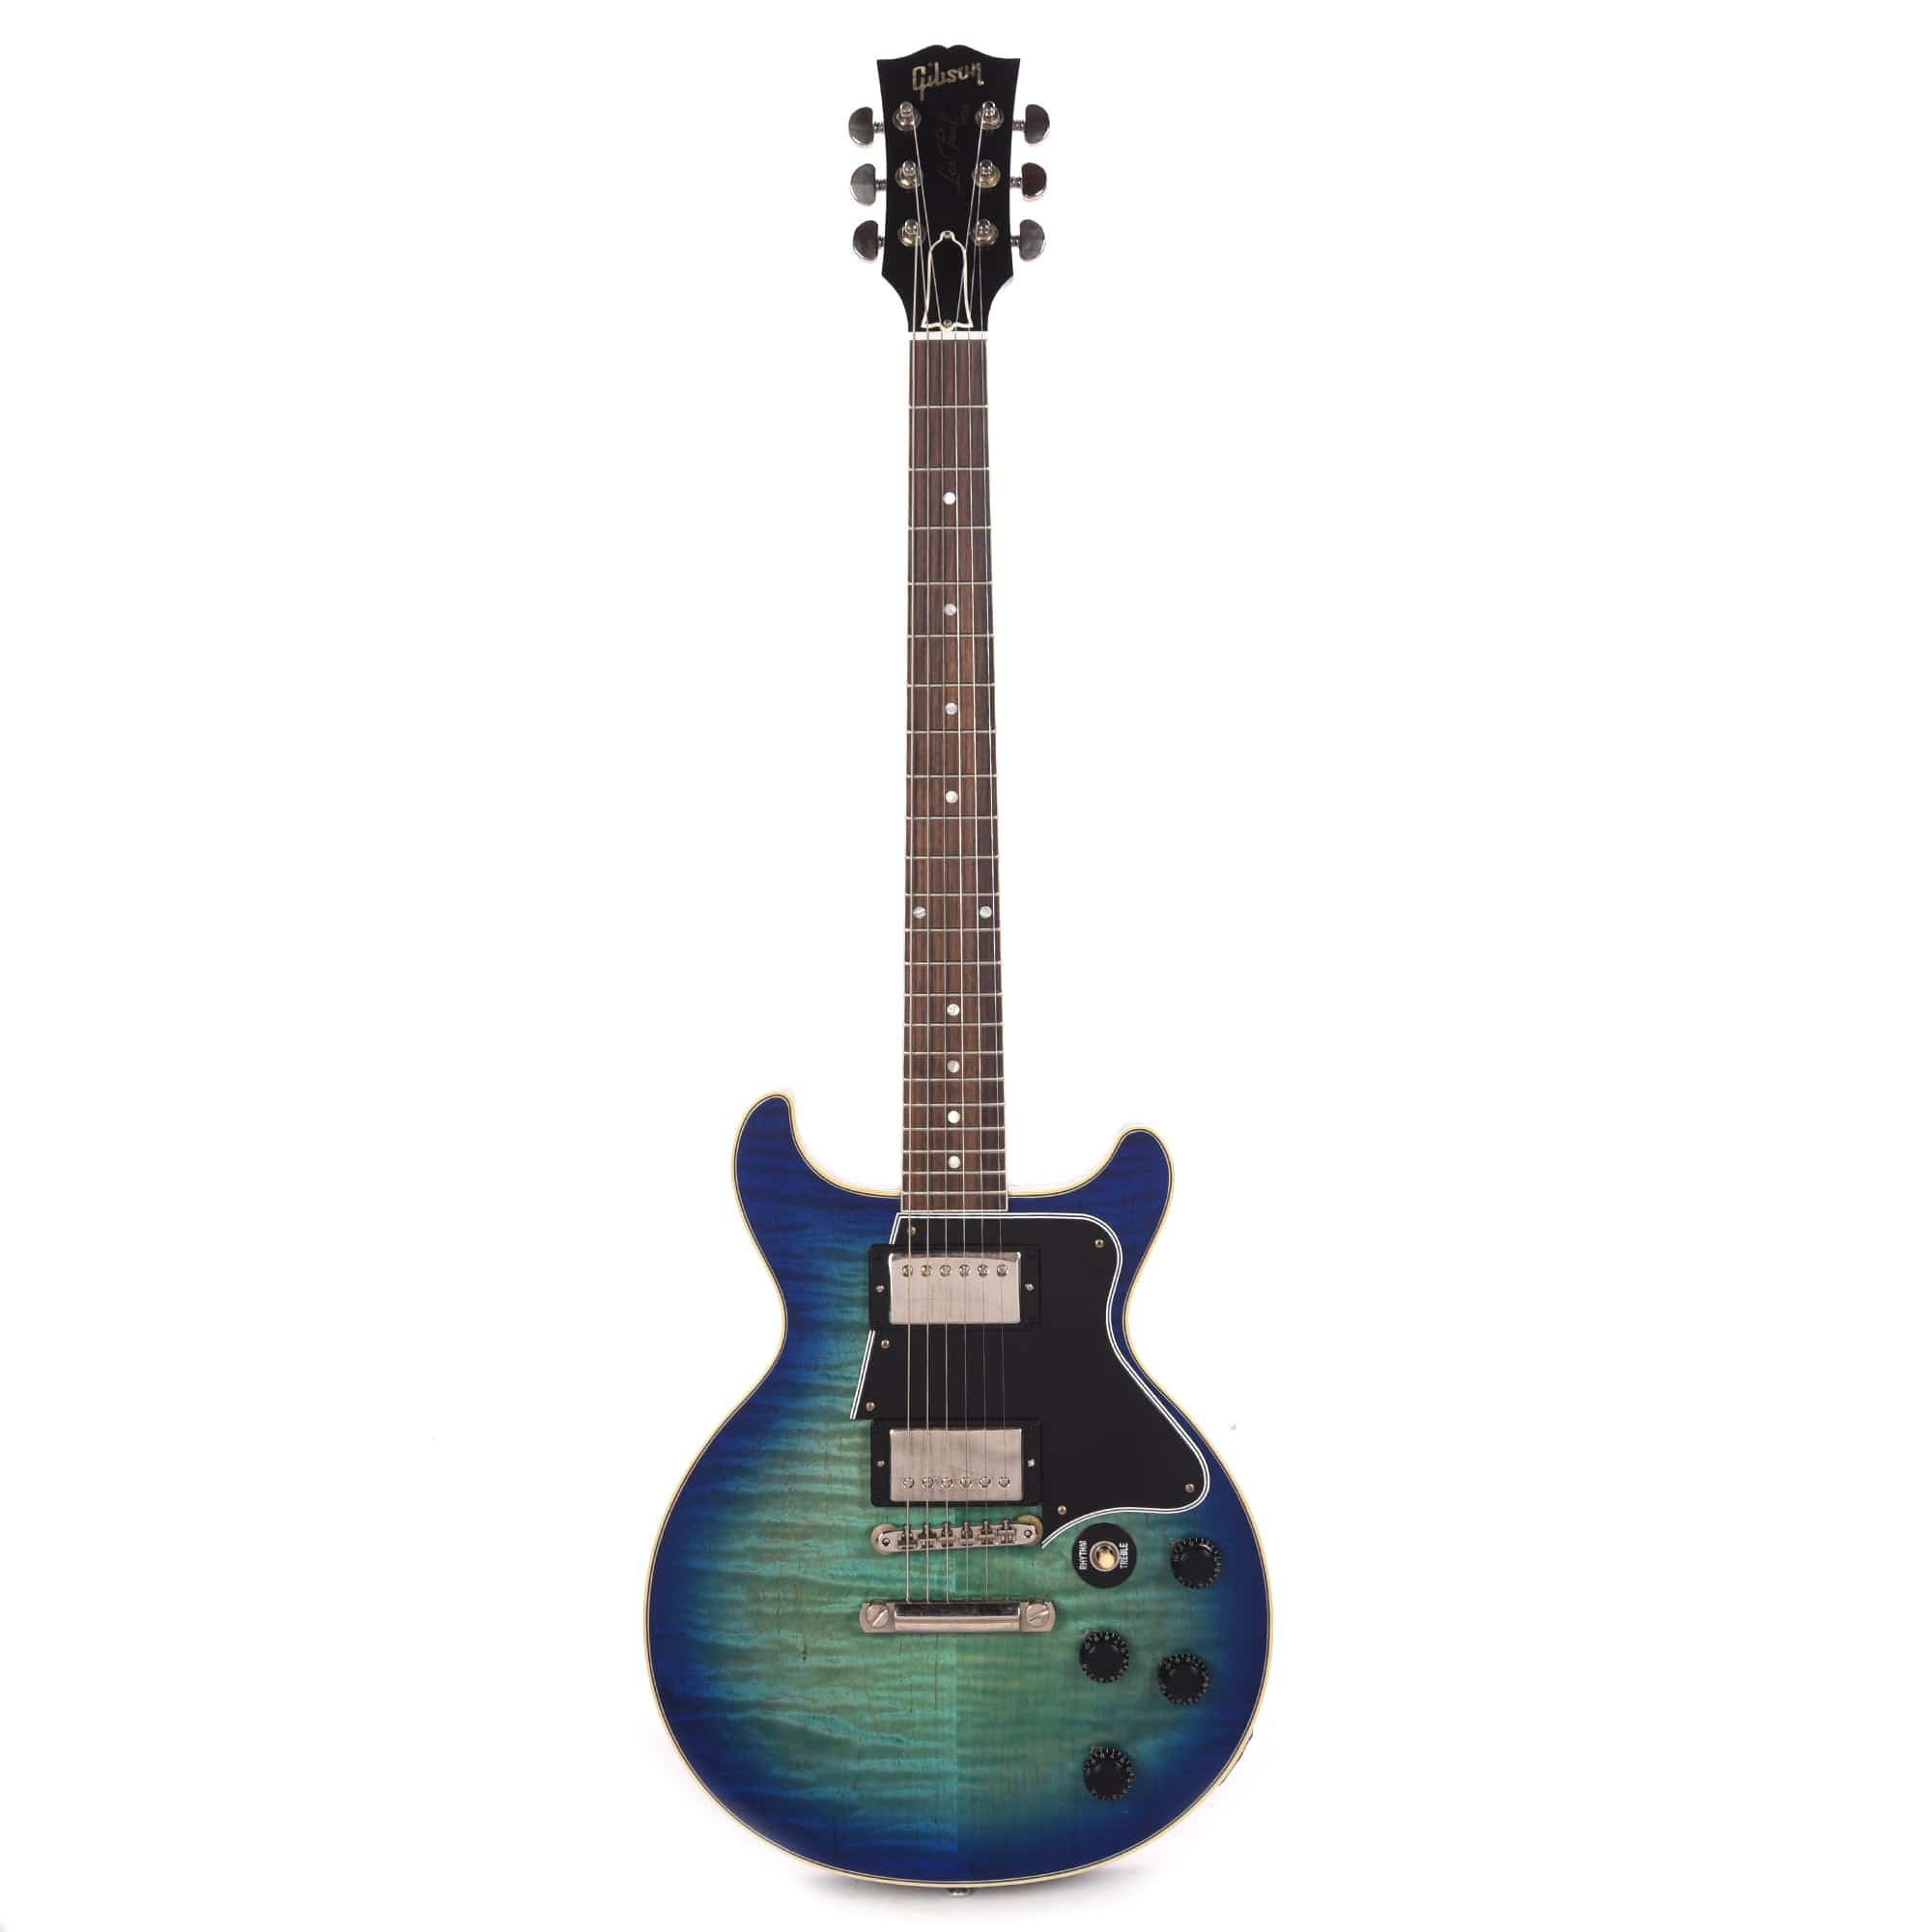 Gibson Custom Shop Les Paul Special Double Cut Figured Maple Top Blue Burst VOS Electric Guitars / Solid Body